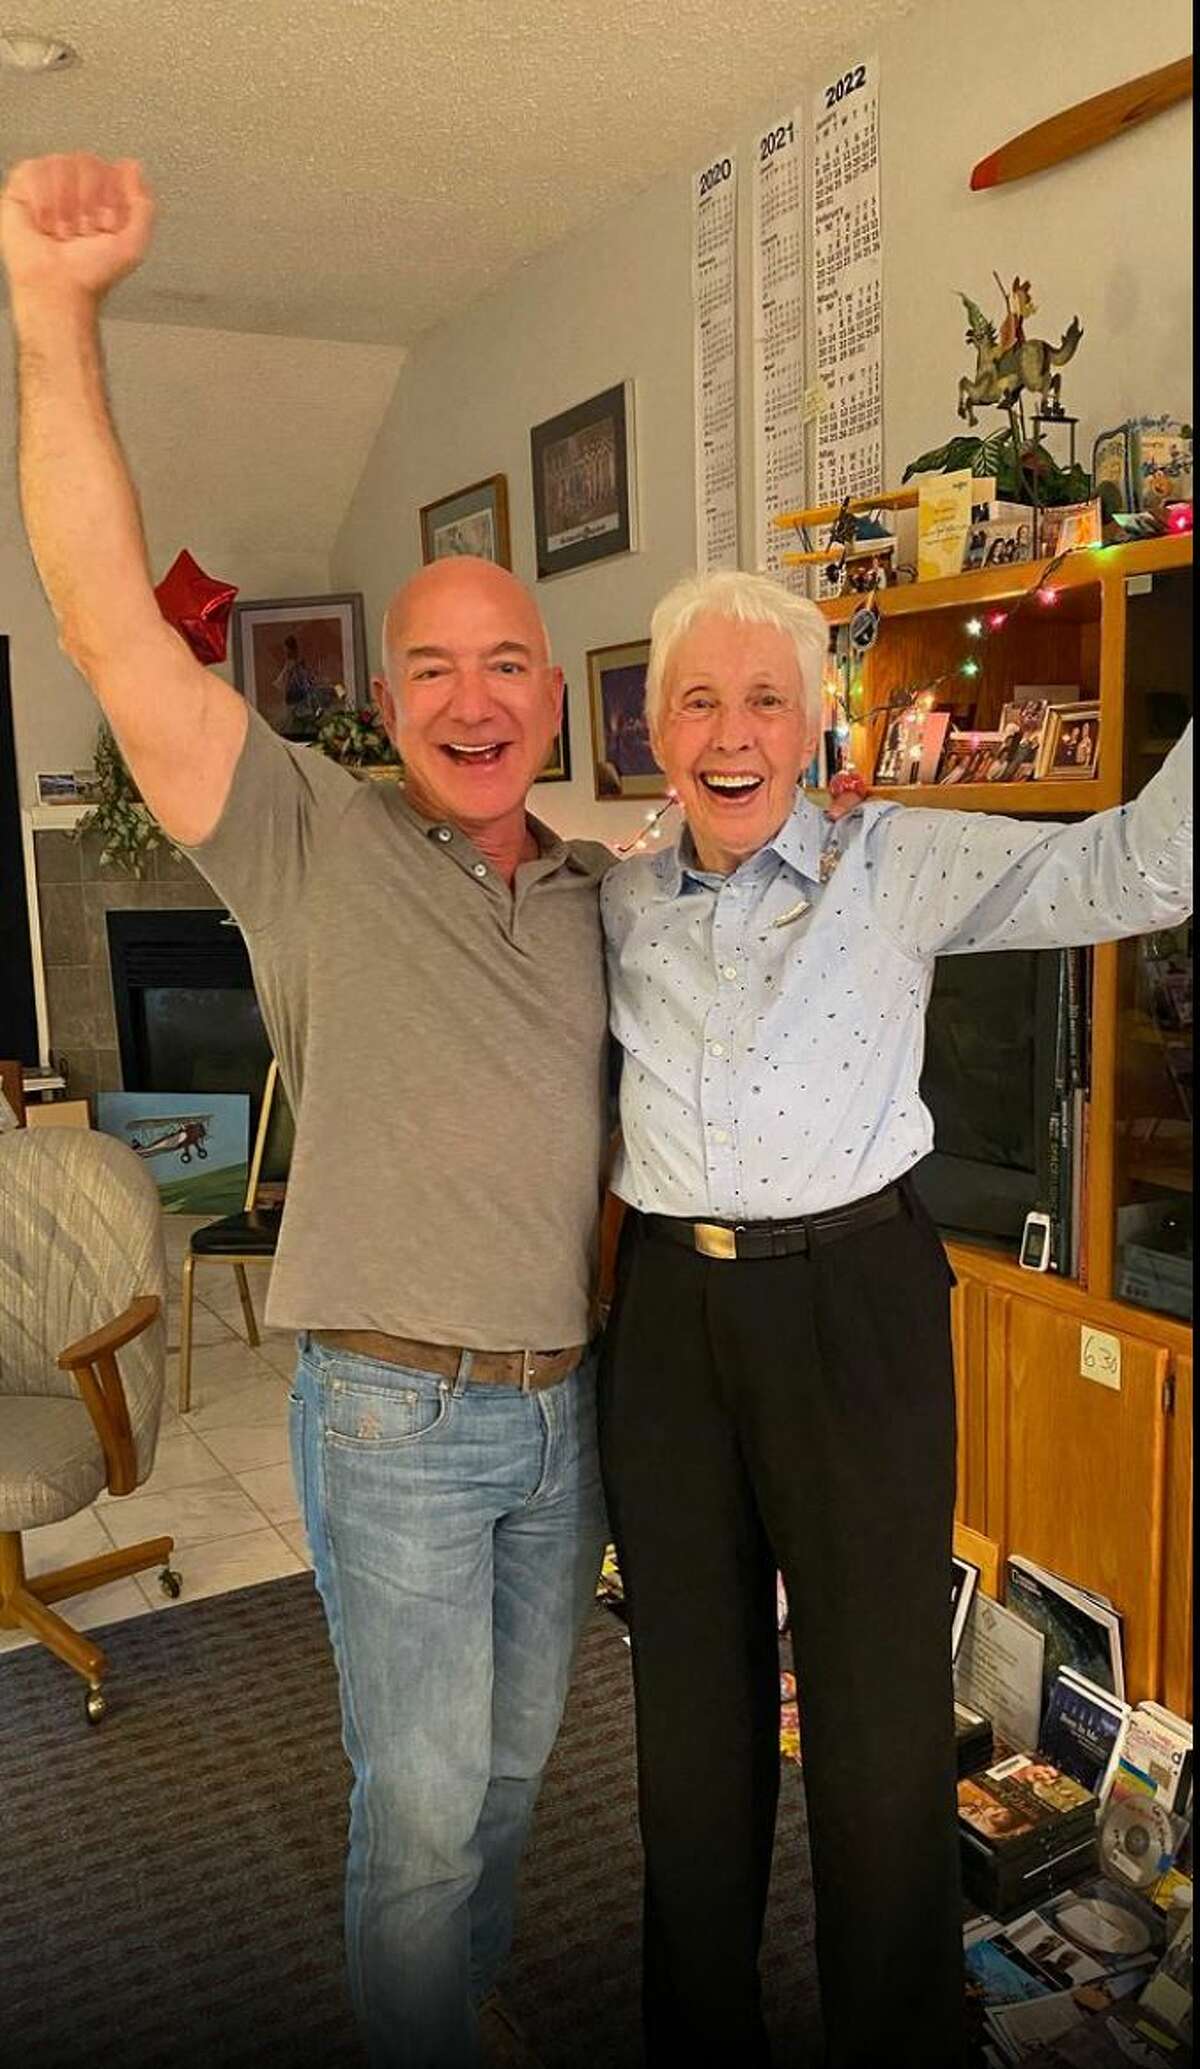 This image posted on Jeff Bezos Instagram account (@jeffbezos) and on the Blue Origin website on July 1st, 2021 shows the moment when Amazon and Blue Origin founder Jeff Bezos (L) announces to Wally Funk (R) she will fly to Space with him on the Blue Origin's New Sheppard first human flight. - Wally Funk, a 82-year-old woman pilot, will join Jeff Bezos in traveling to space this month on the first crewed spaceflight for the billionaire's company Blue Origin, the firm announced Thursday. Funk will become the oldest person ever to fly to space when she takes part in the July 20 journey aboard the New Shepard launch vehicle along with Bezos, his brother Mark and the unnamed winner of an auction for another seat on the aircraft. (Photo by - / BLUE ORIGIN / AFP) / RESTRICTED TO EDITORIAL USE - MANDATORY CREDIT "AFP PHOTO /BLUE ORIGIN" - NO MARKETING - NO ADVERTISING CAMPAIGNS - DISTRIBUTED AS A SERVICE TO CLIENTS